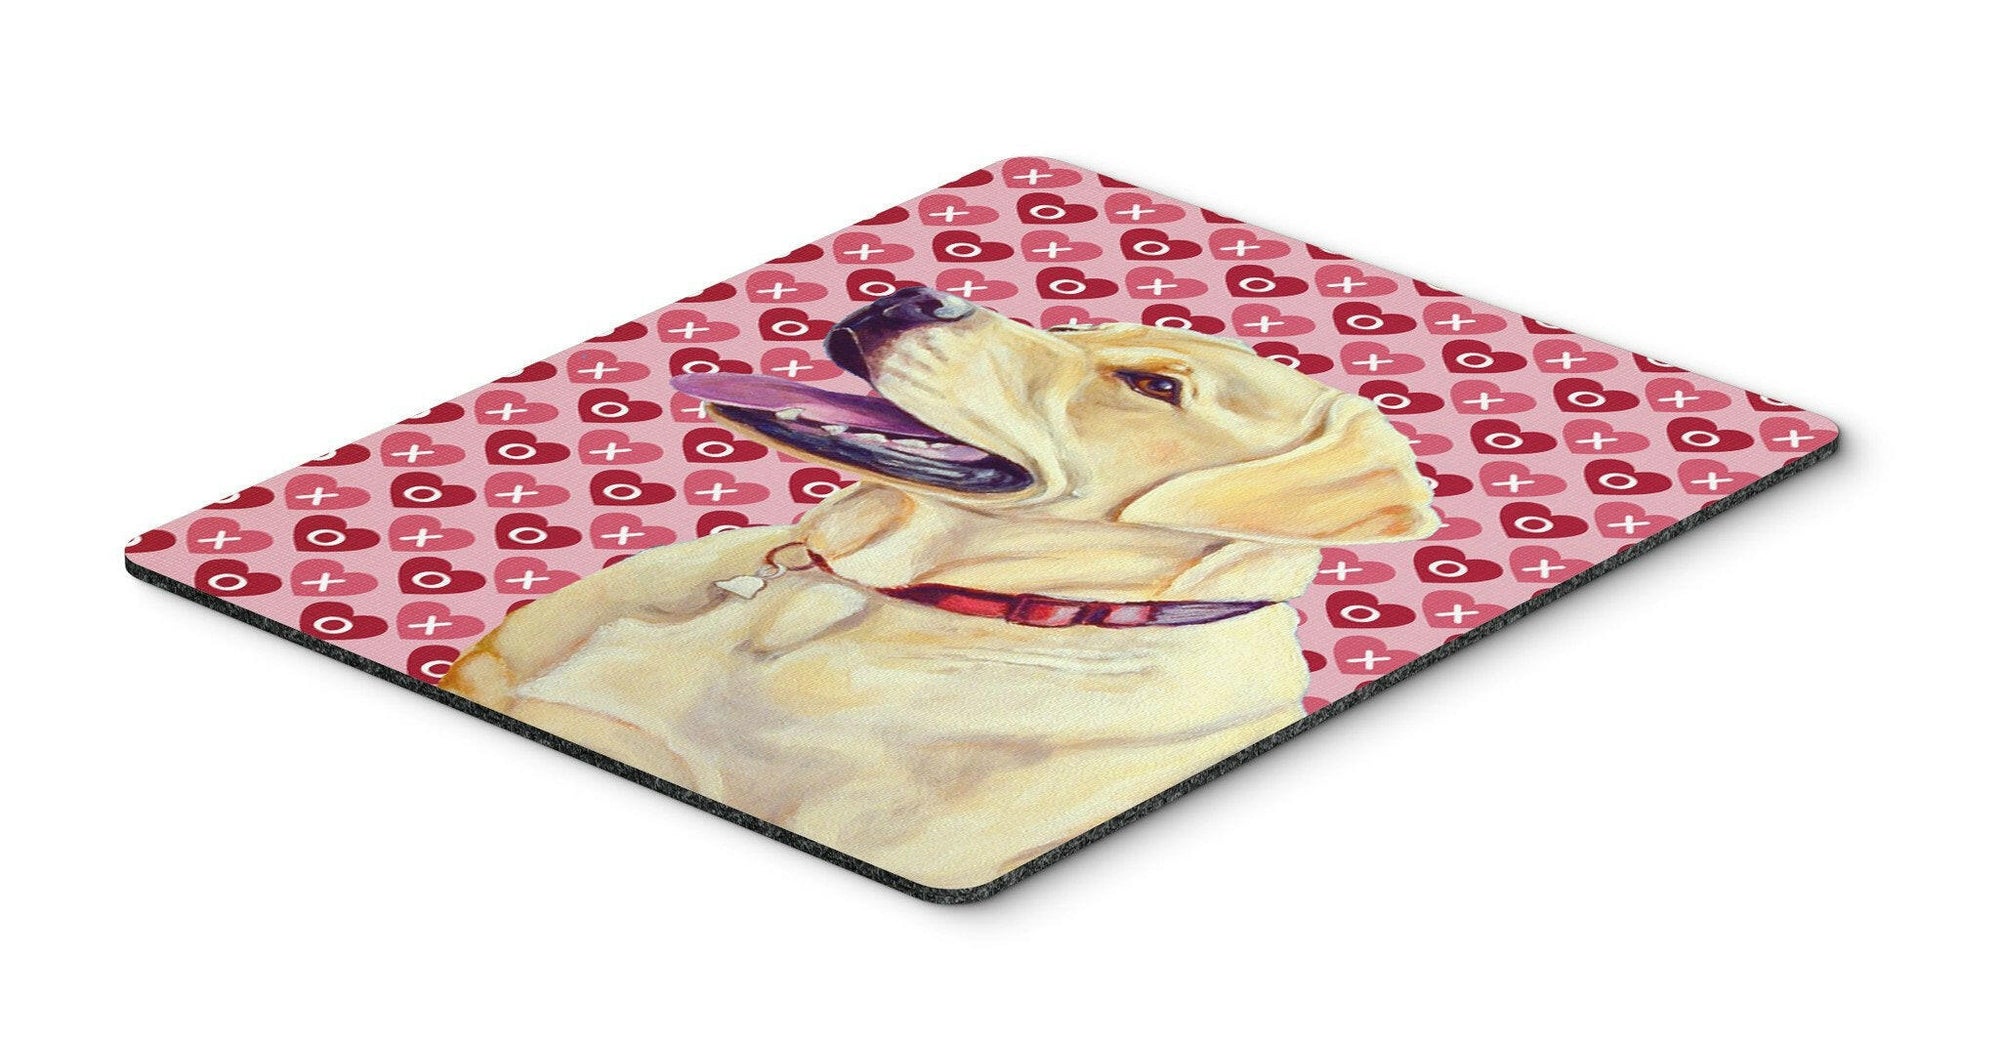 Labrador Hearts Love and Valentine's Day Portrait Mouse Pad, Hot Pad or Trivet by Caroline's Treasures